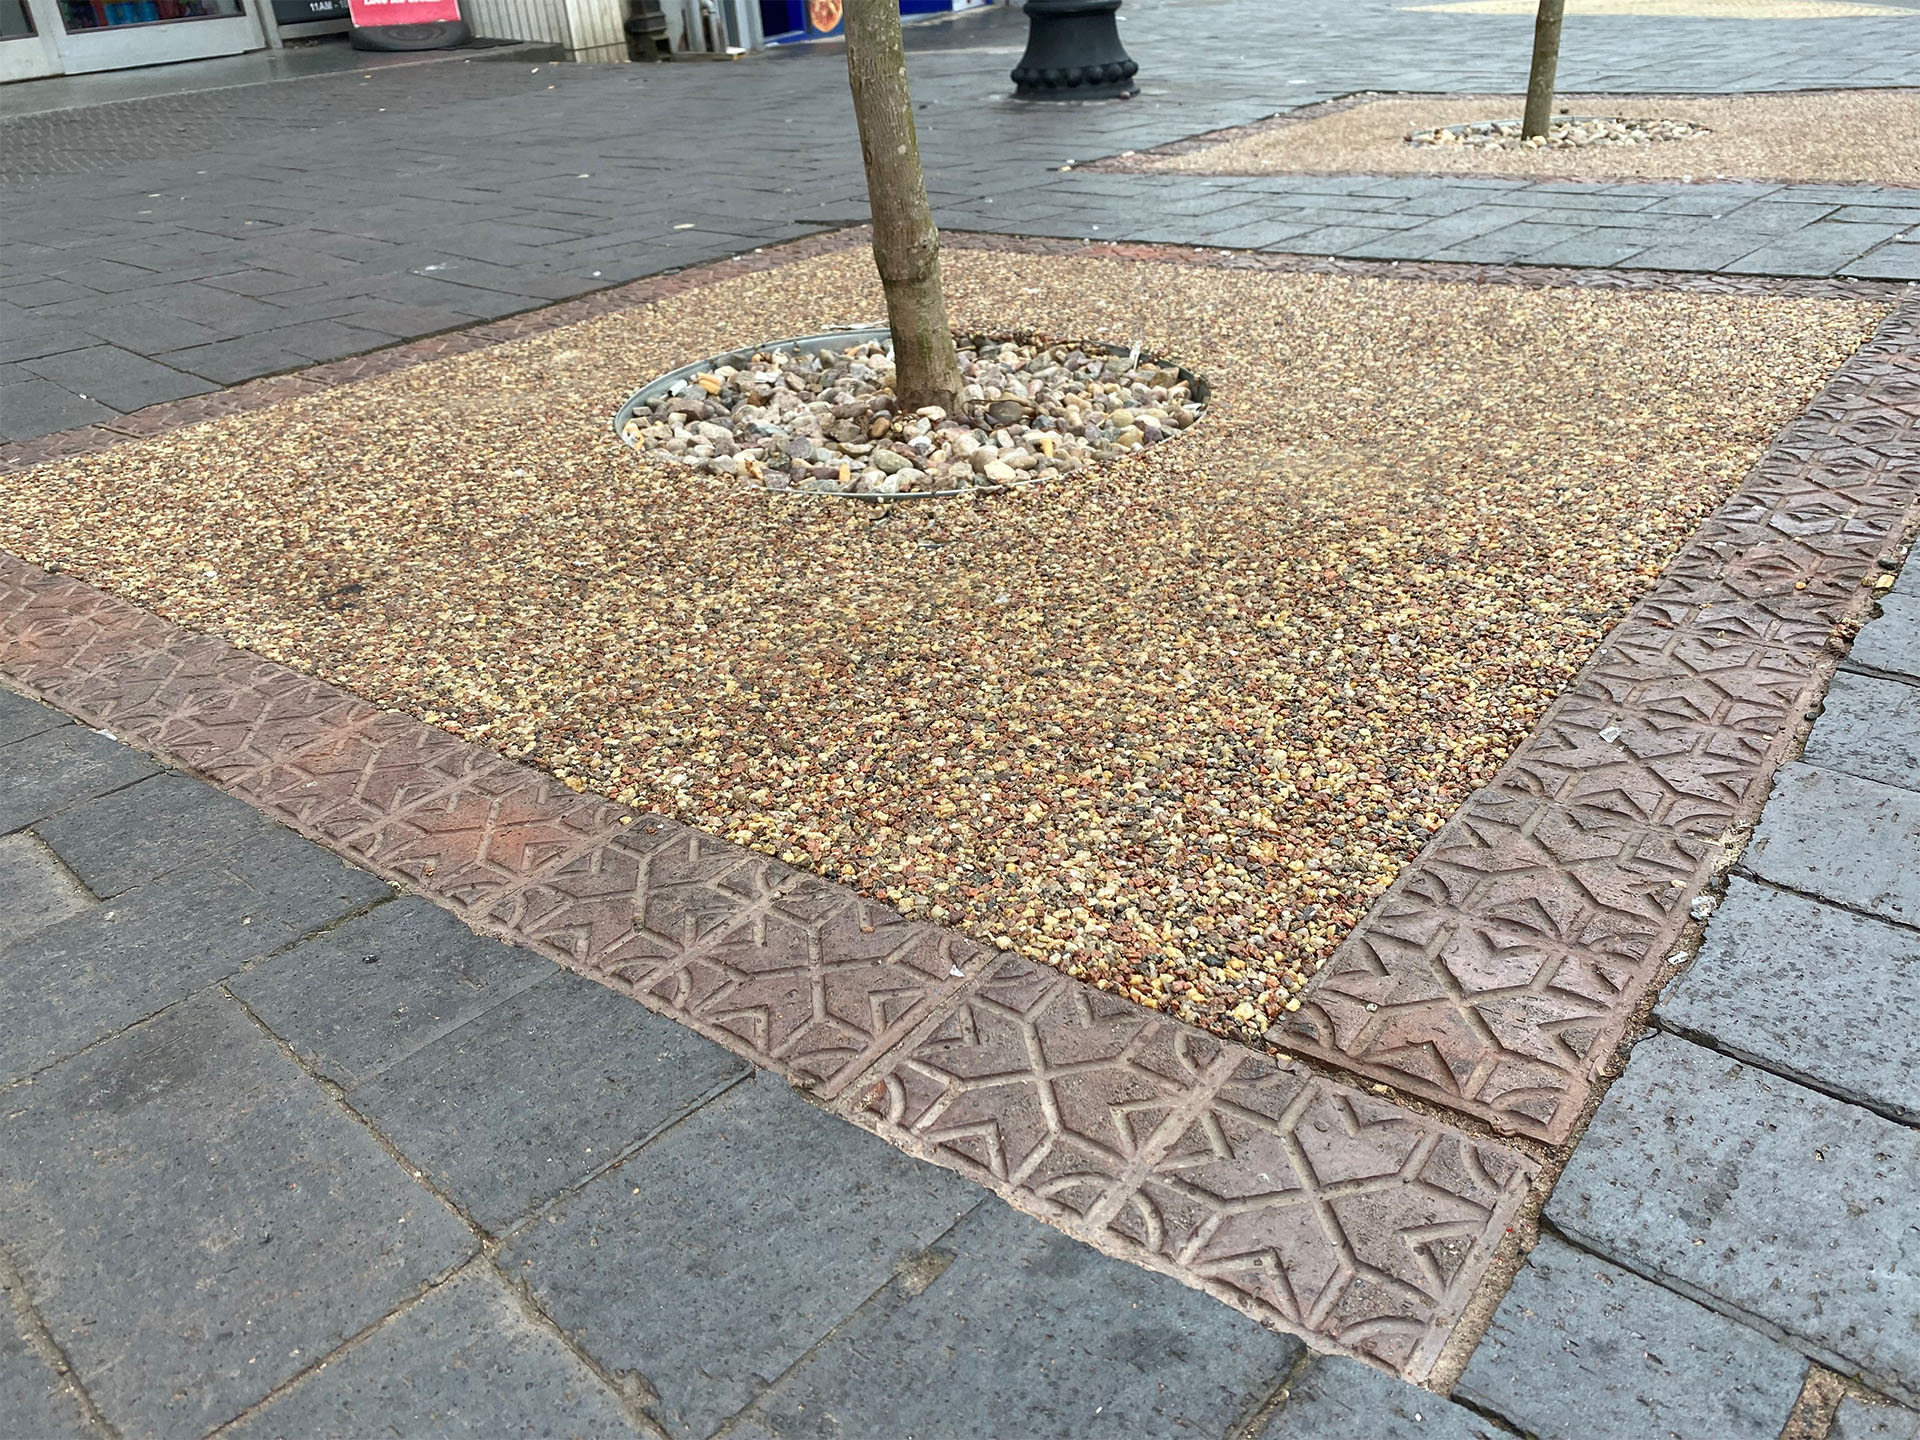 Brown brindle star pavers add detail and create a frame surrounding the tree